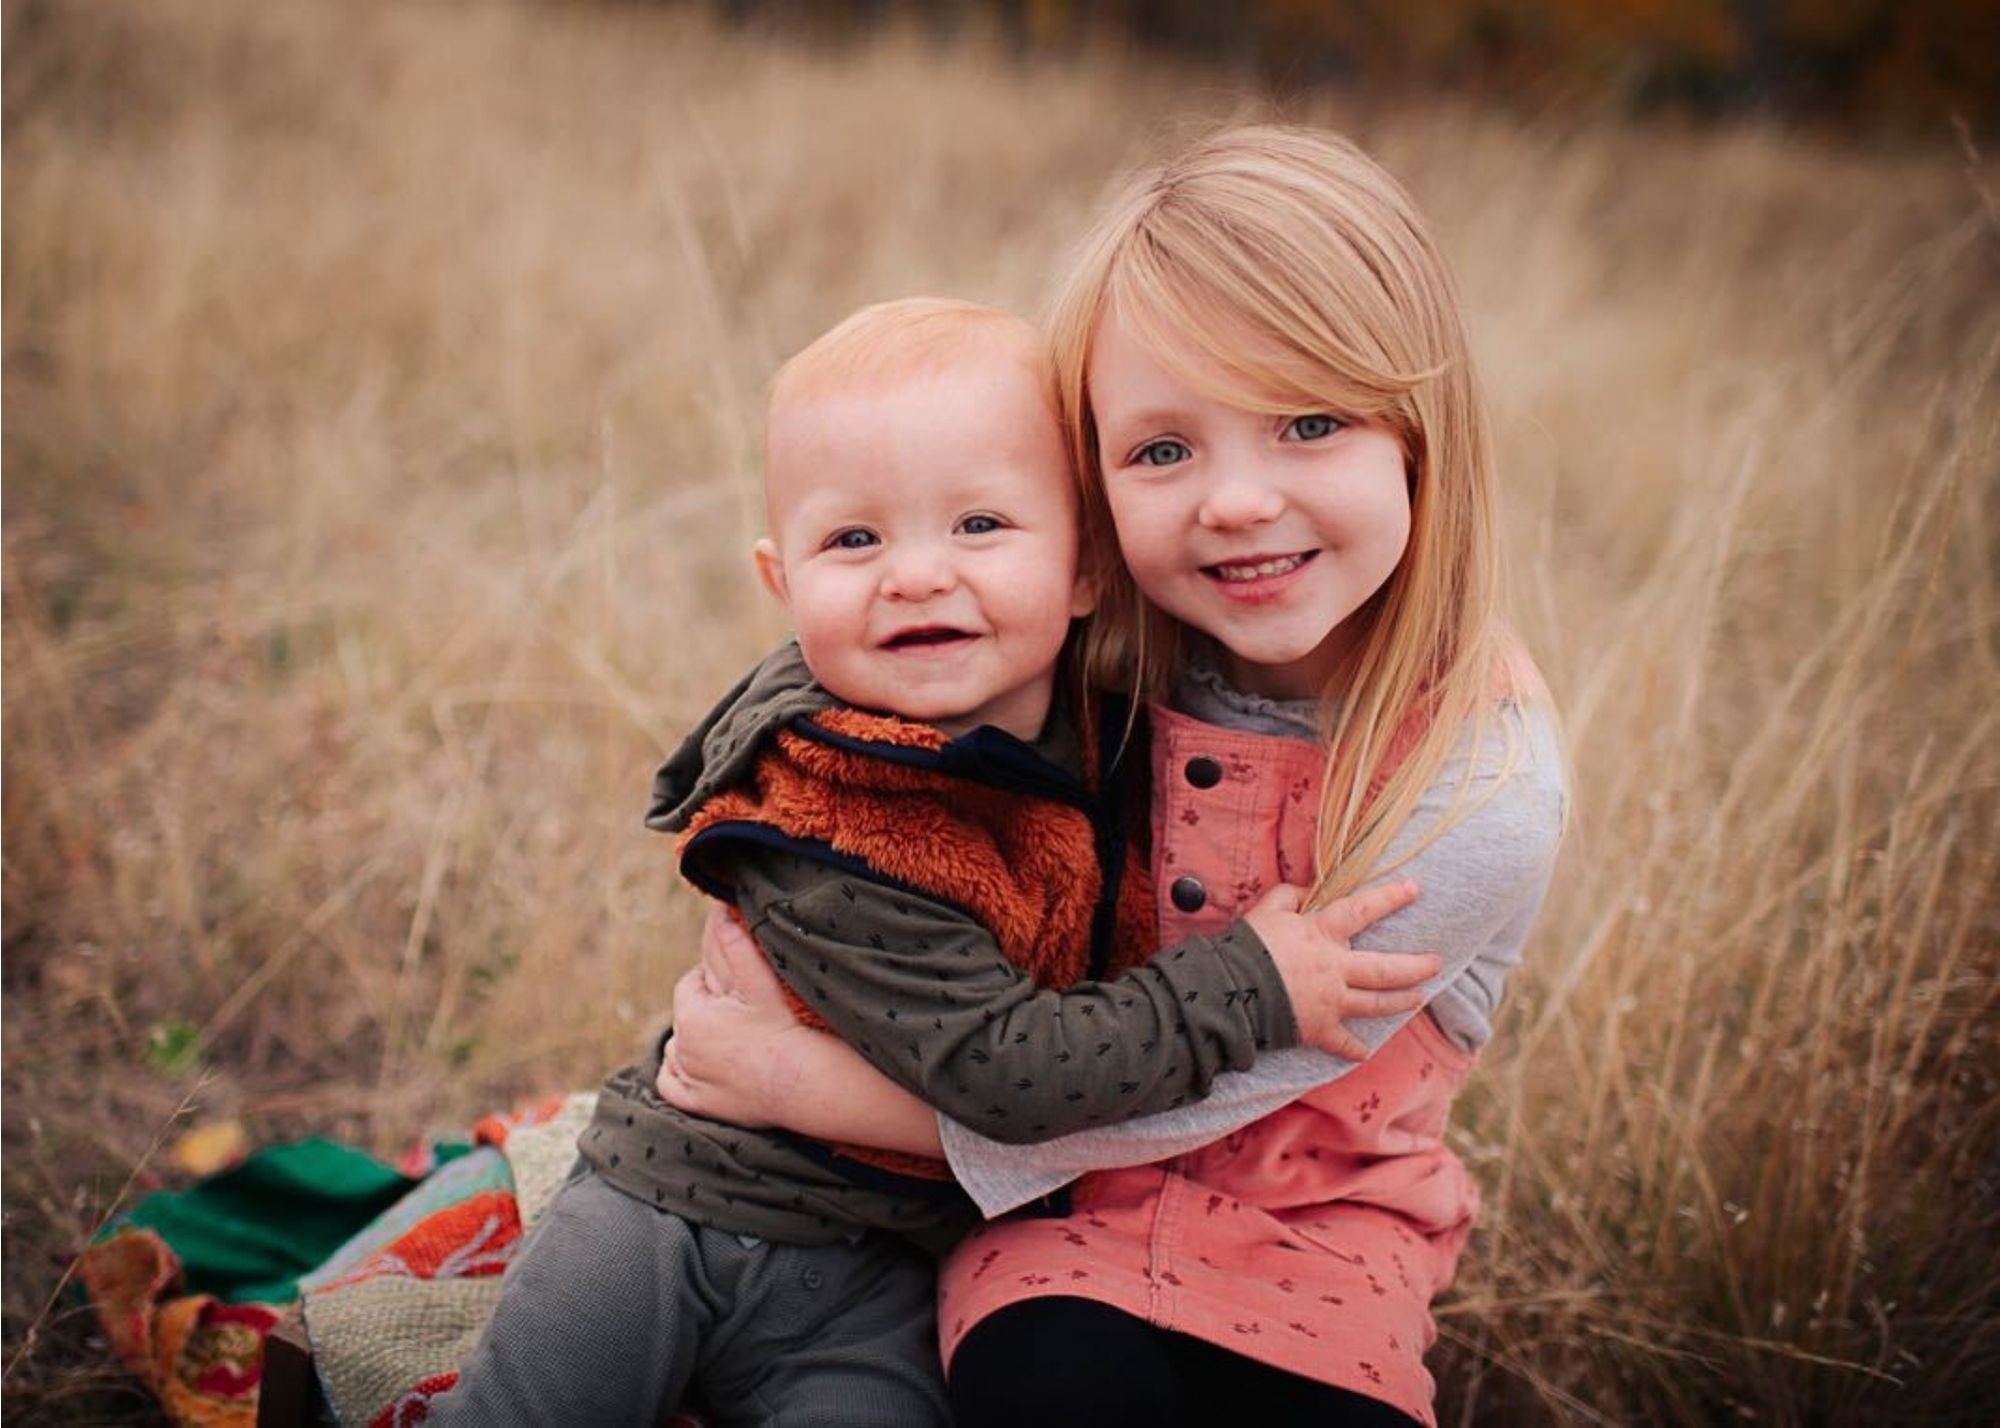 Skyleigh's children posing for a photo together smiling side by side in the fall grass